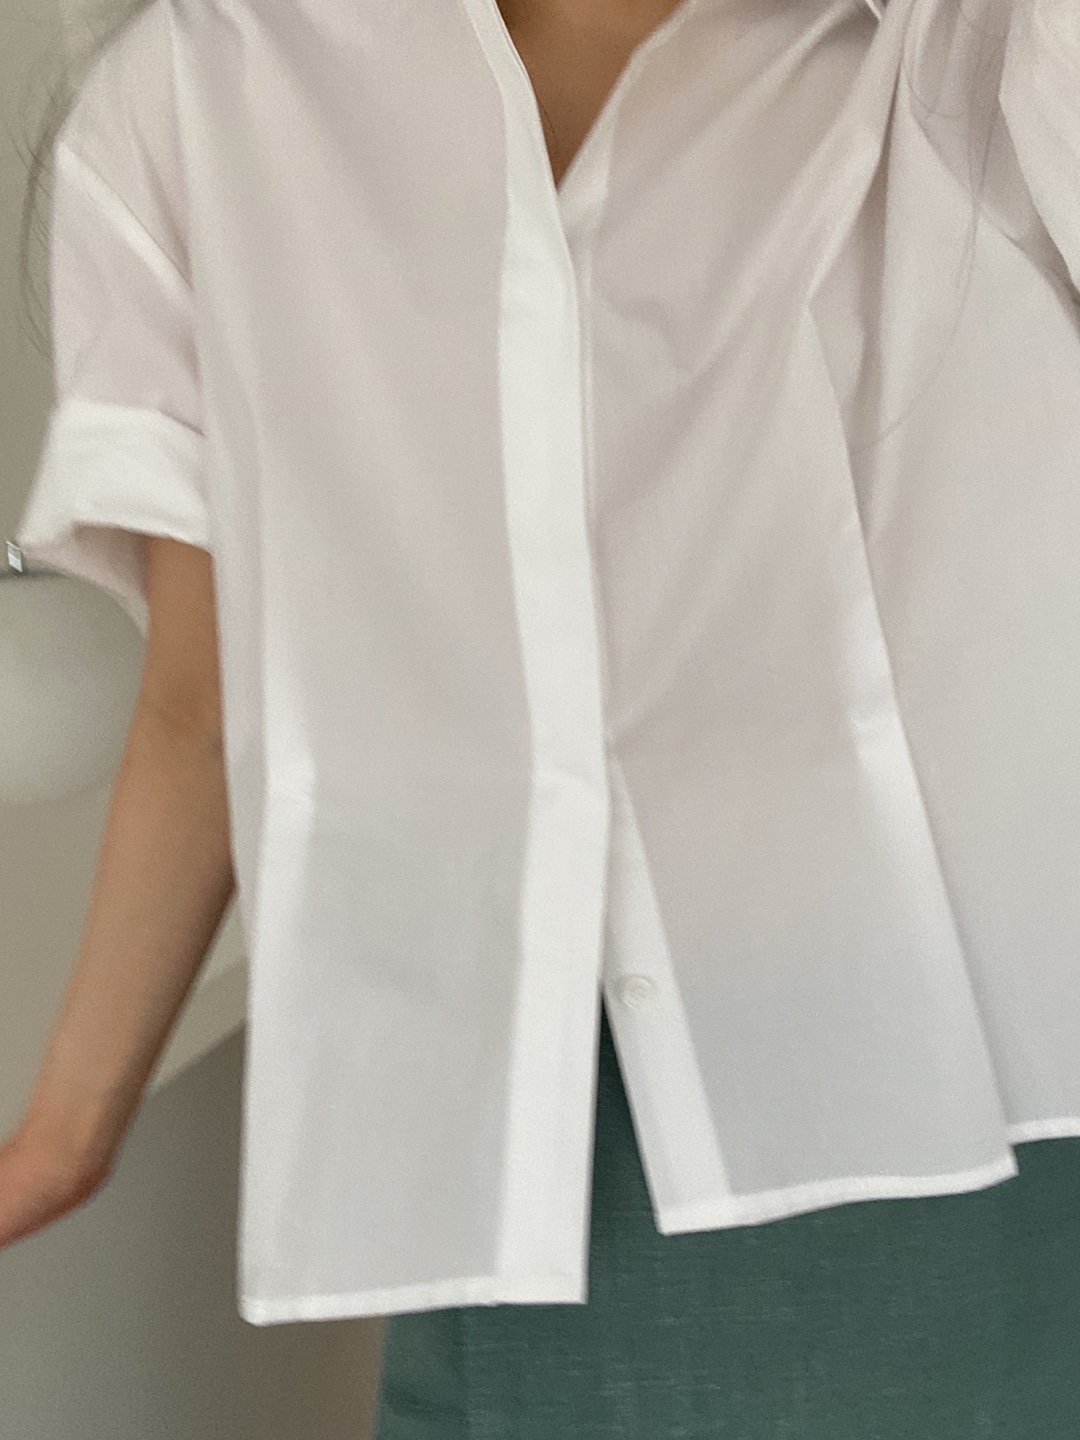 bell sleeve shirts-white